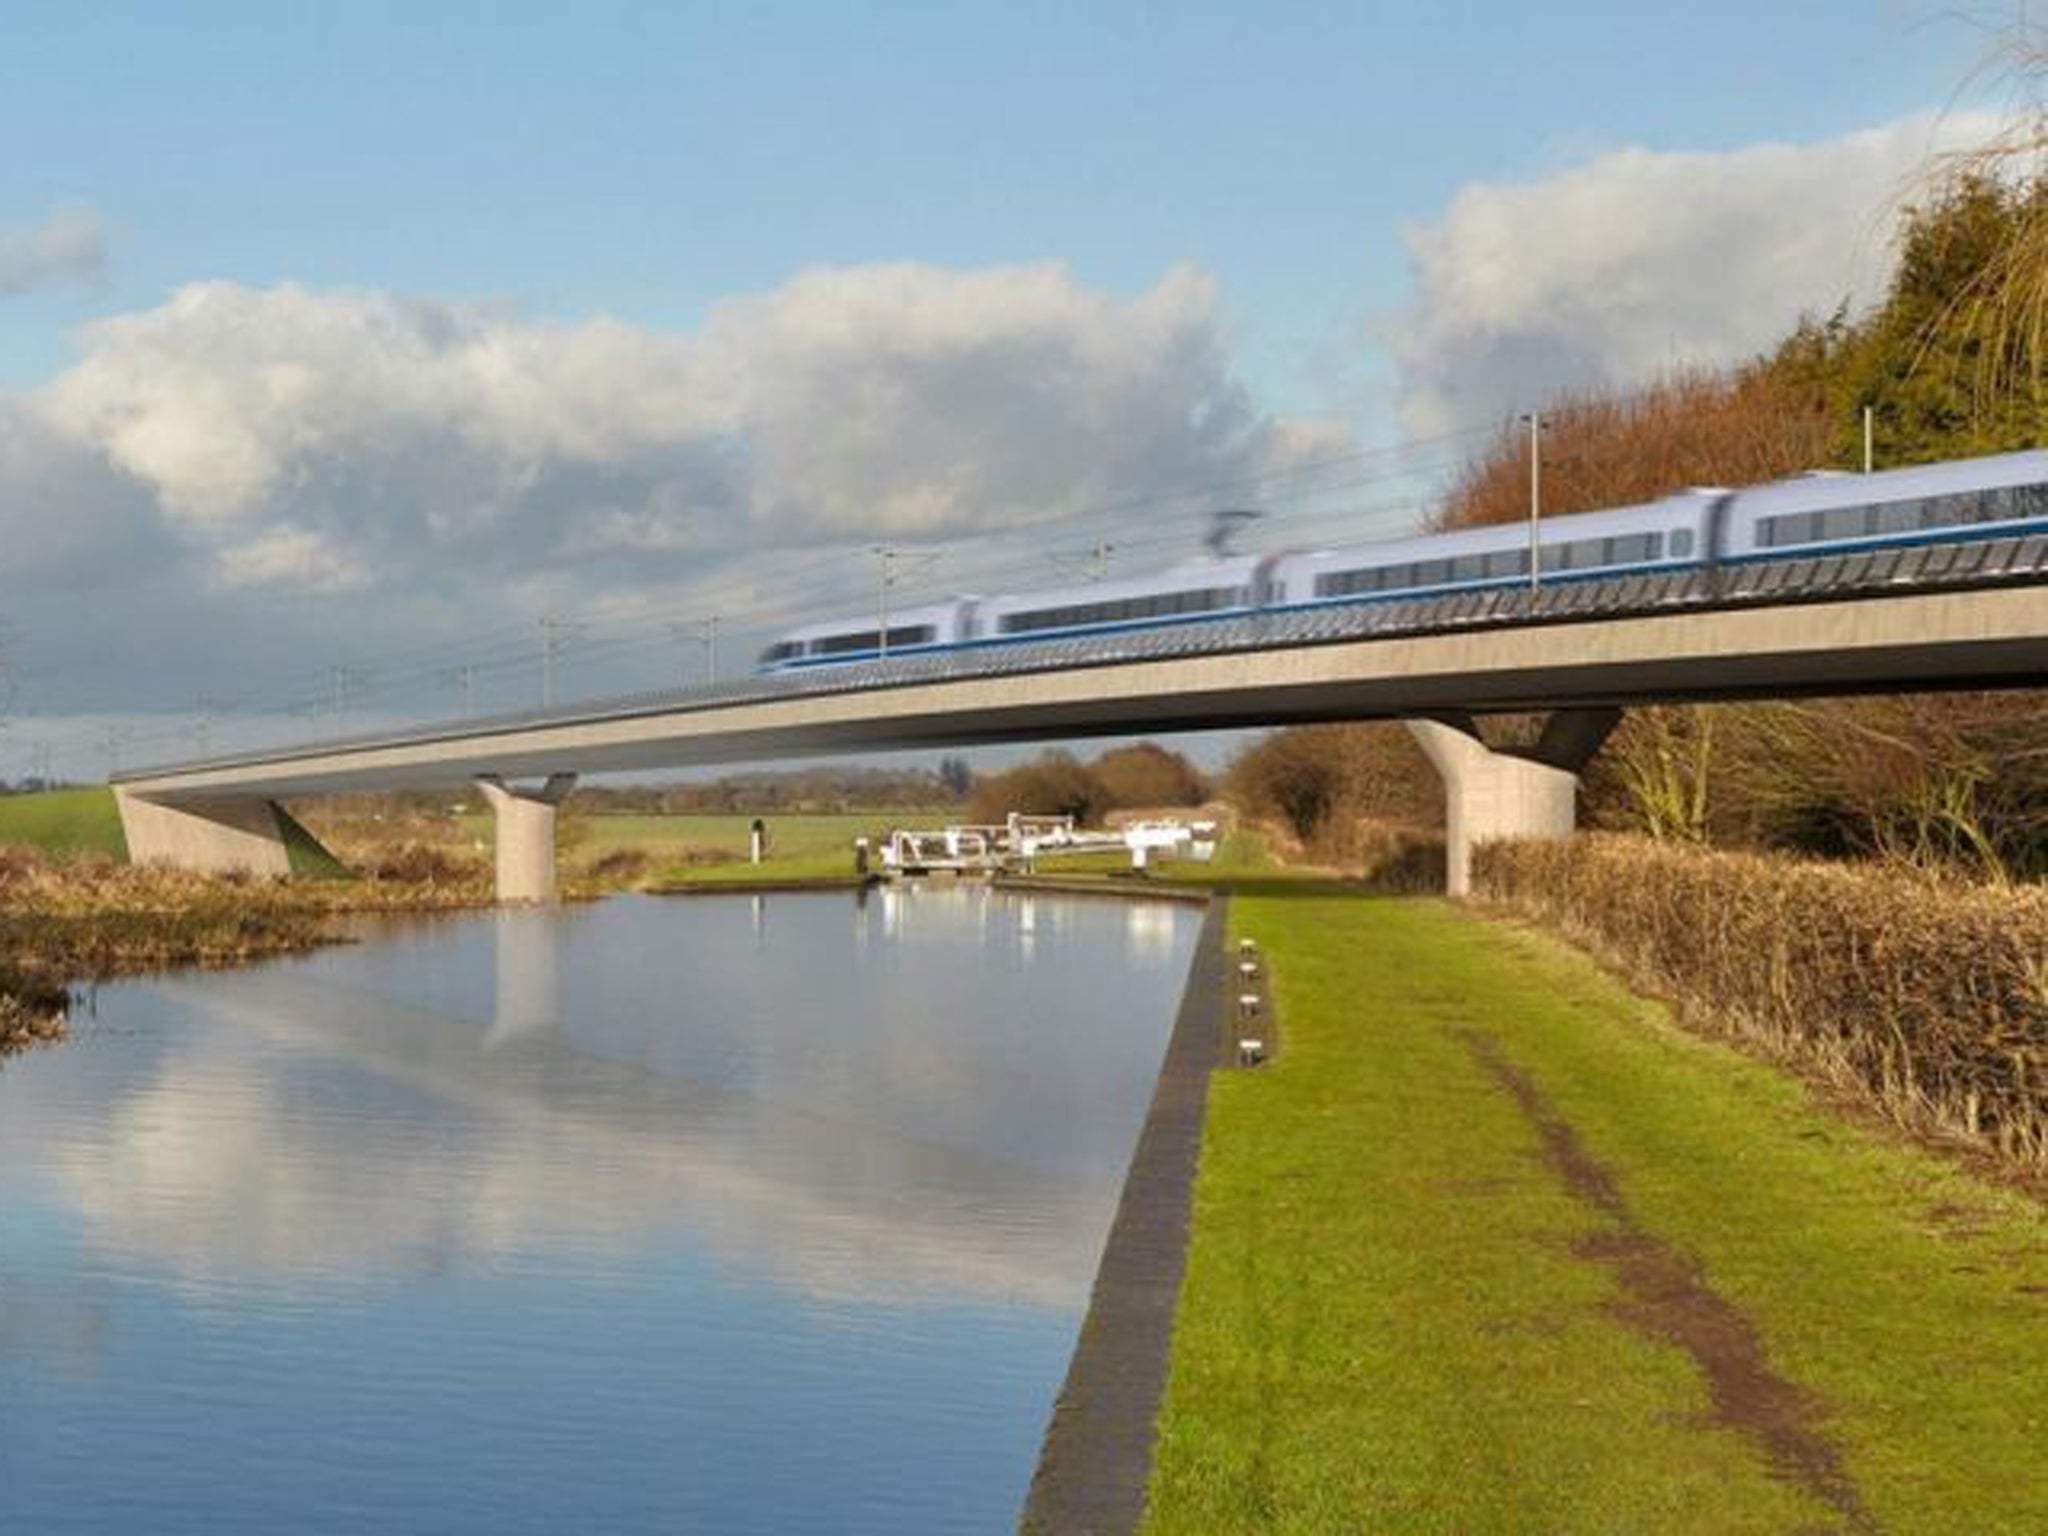 The cost of the project in its entirety is estimated at £42.6 billion with £7.5 billion needed for the high-speed trains